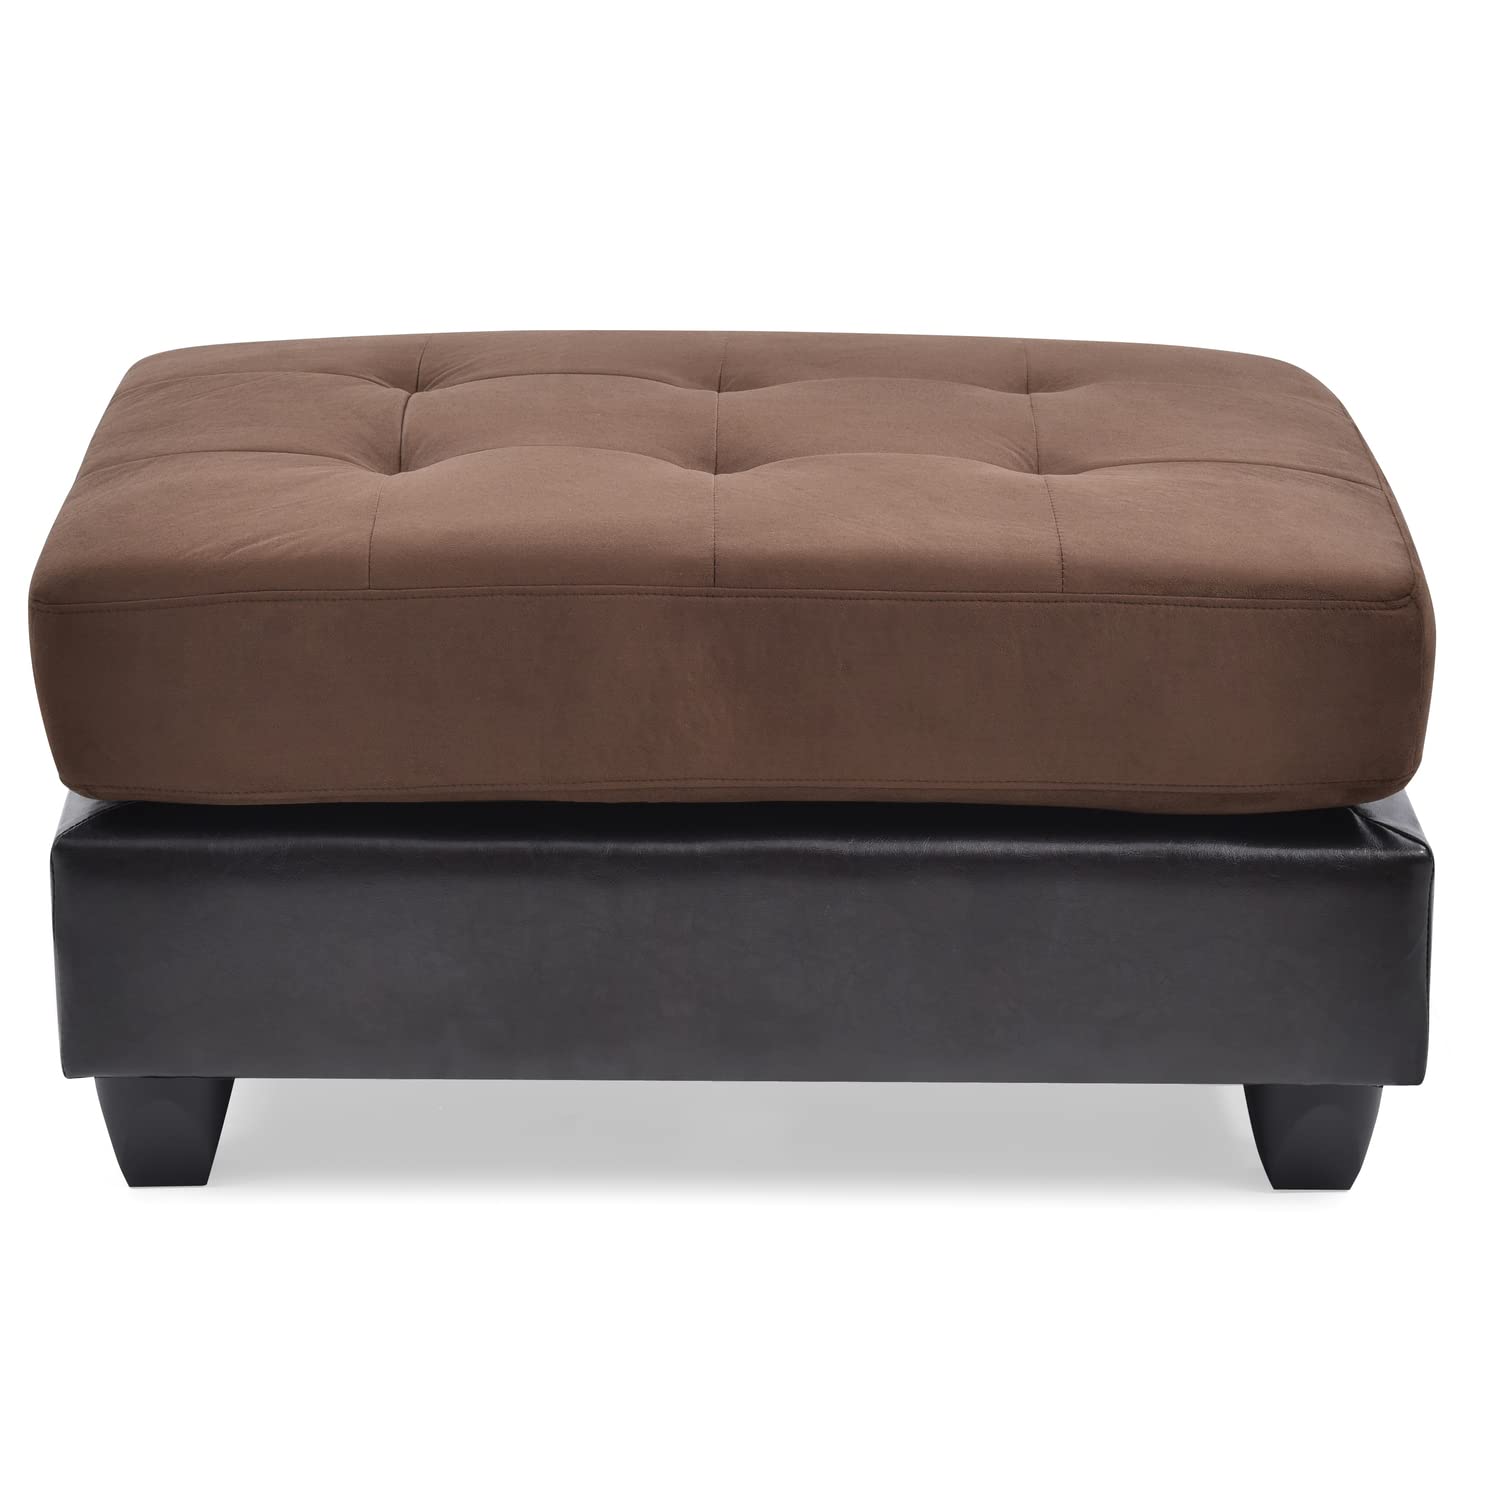 Glory Furniture Pounder Microsuede Ottoman in Chocolate